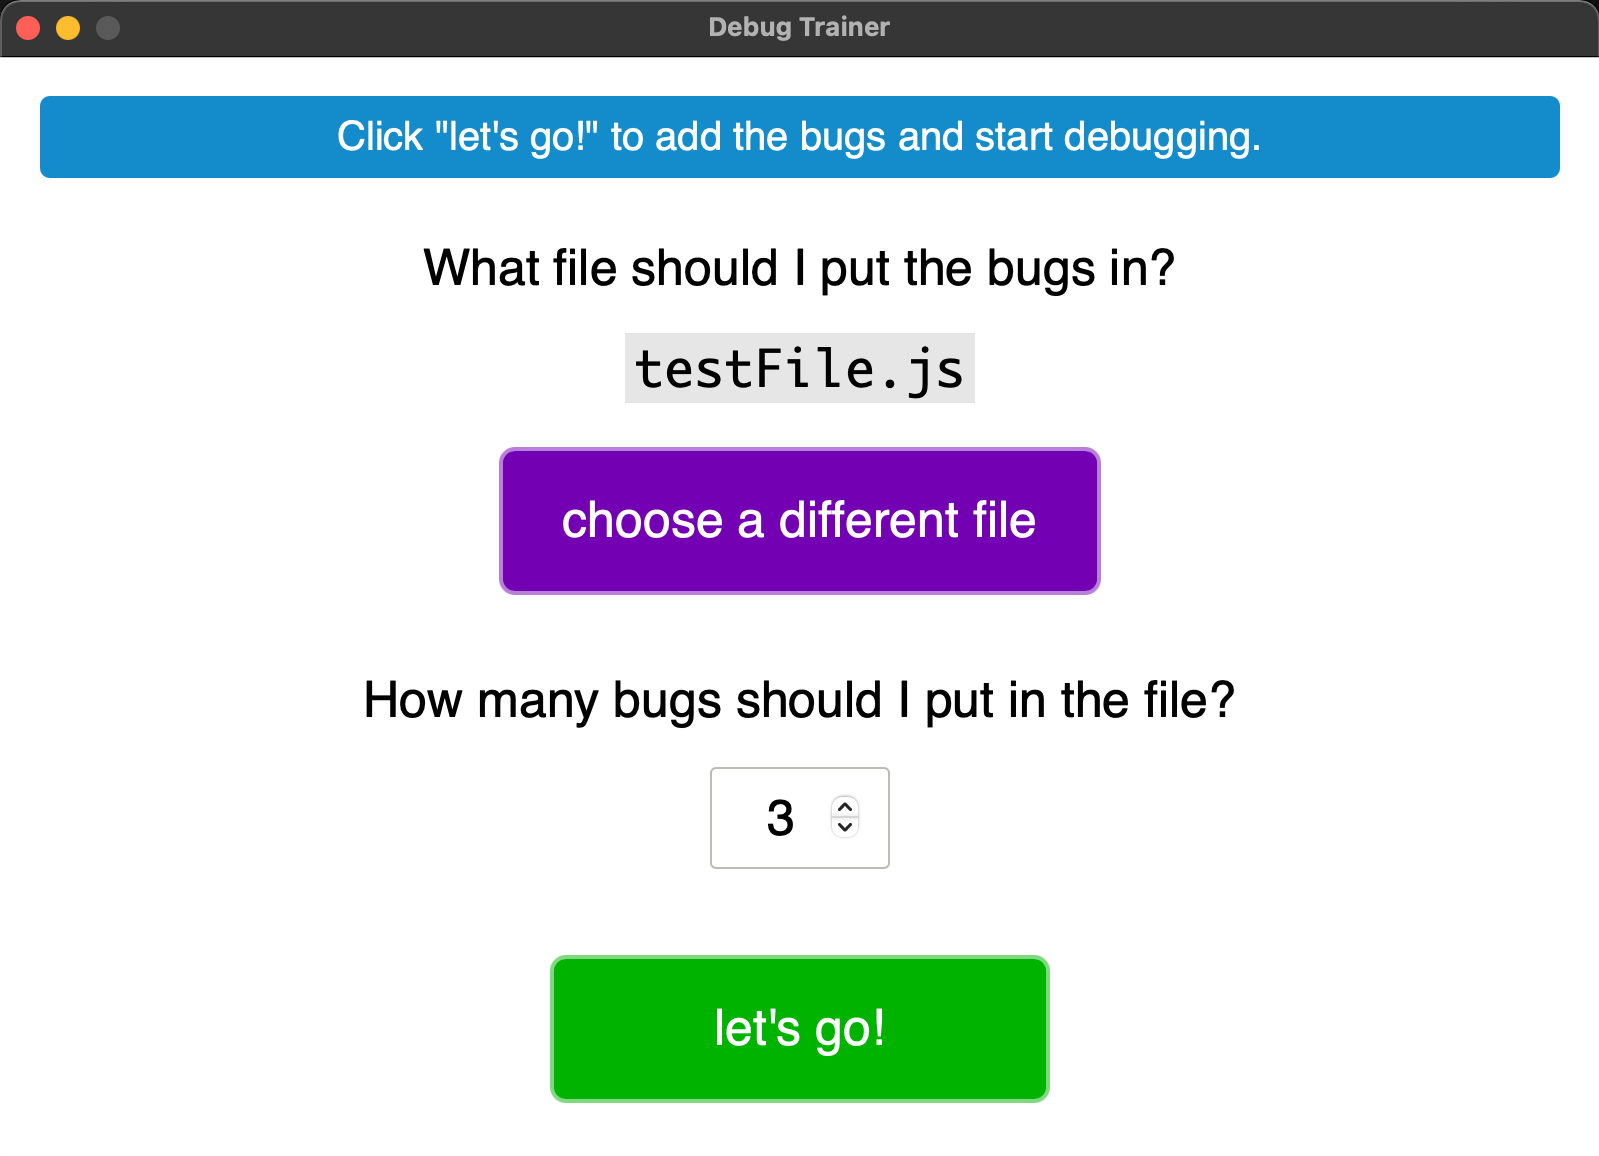 The part of the Debug Trainer app where you tell it what to do; a page asking “What file should I put the bugs in?” and “How many bugs should I put in the file?”